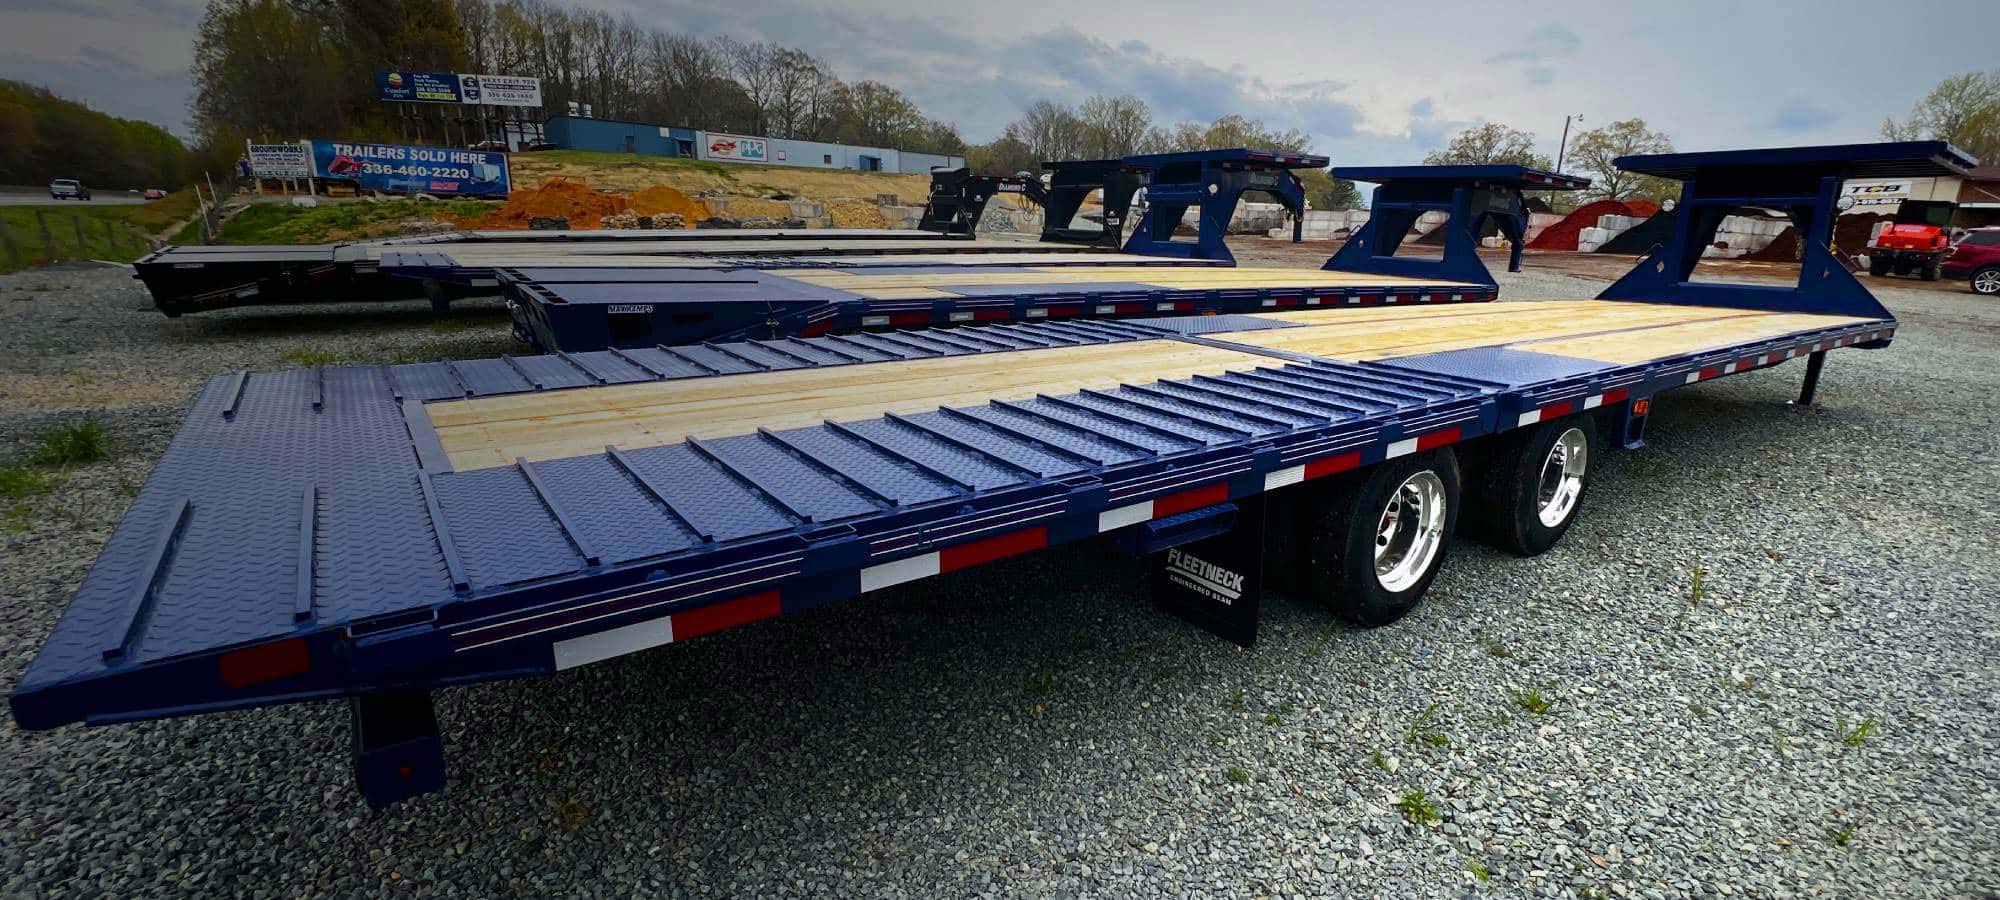 Groundworks Trailers